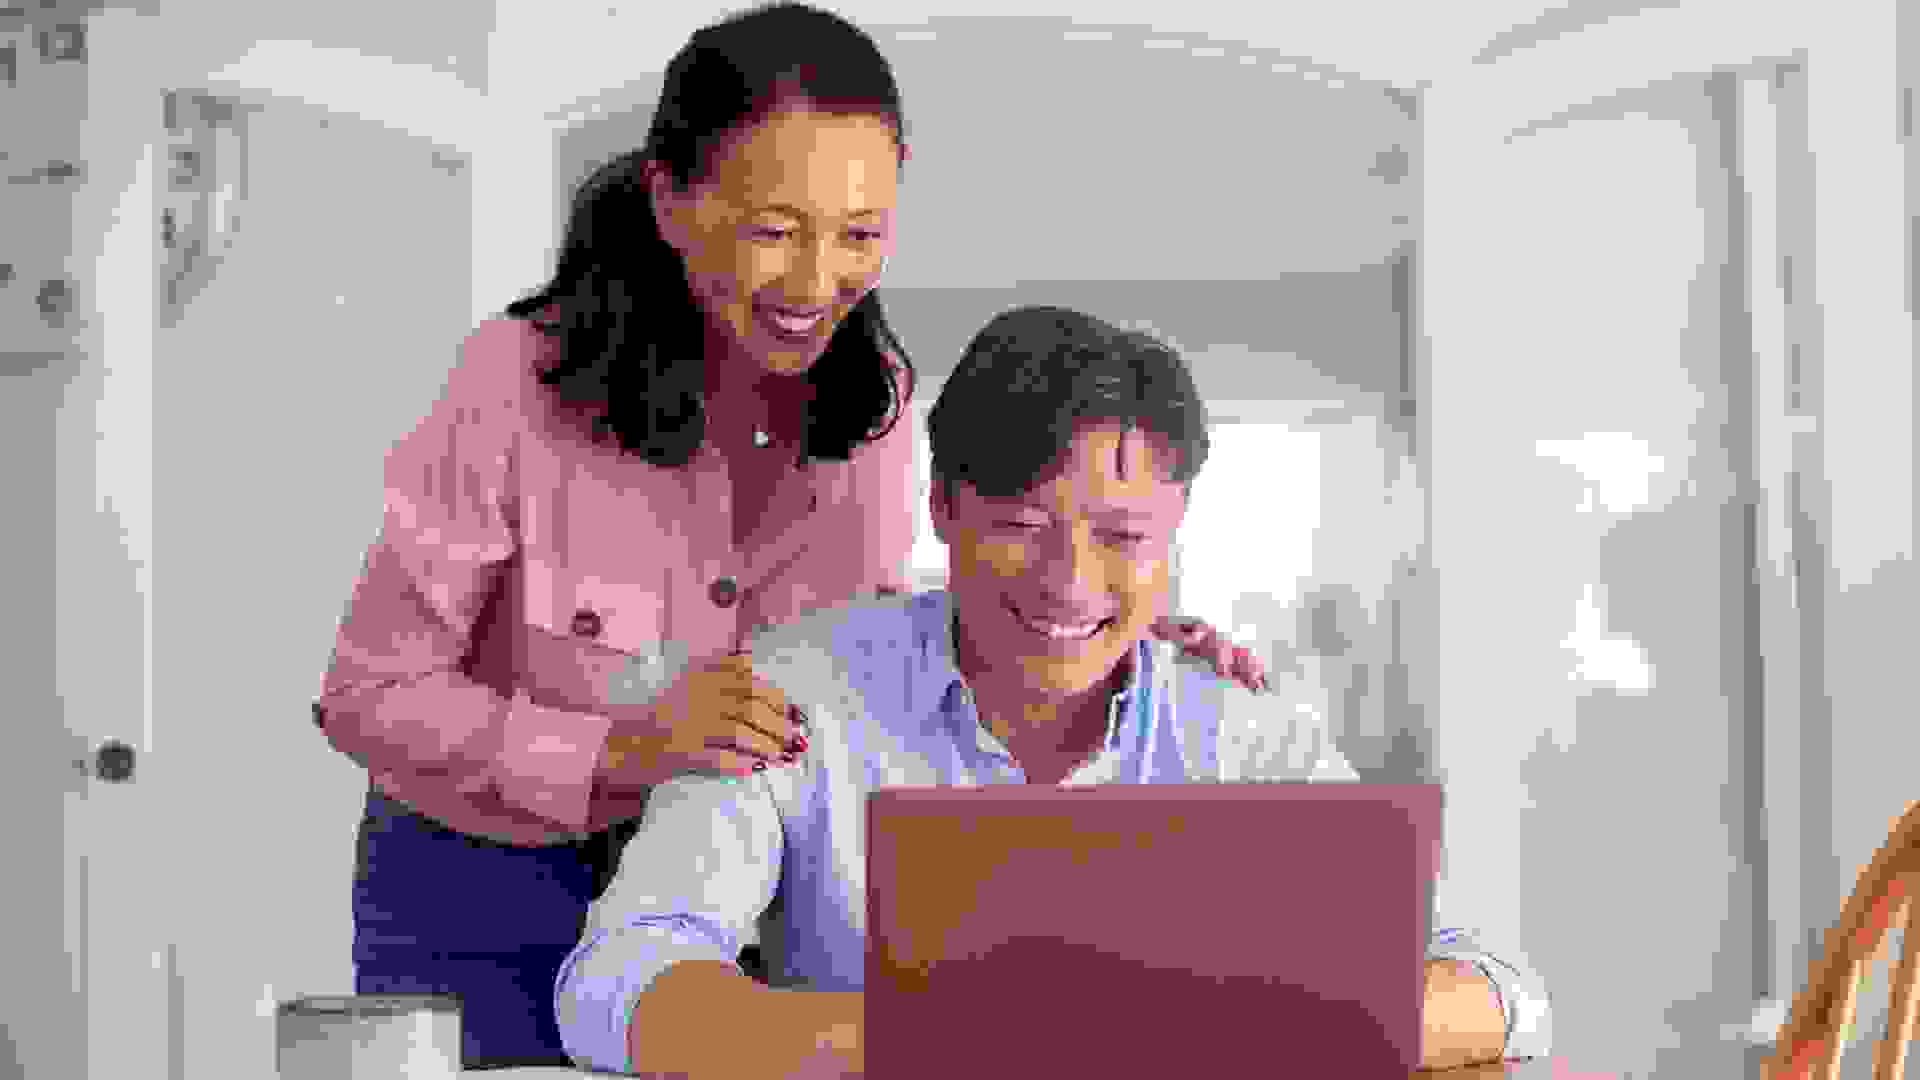 Mature Asian Couple At Home Using Laptop To Organise Household Bills And Finances.